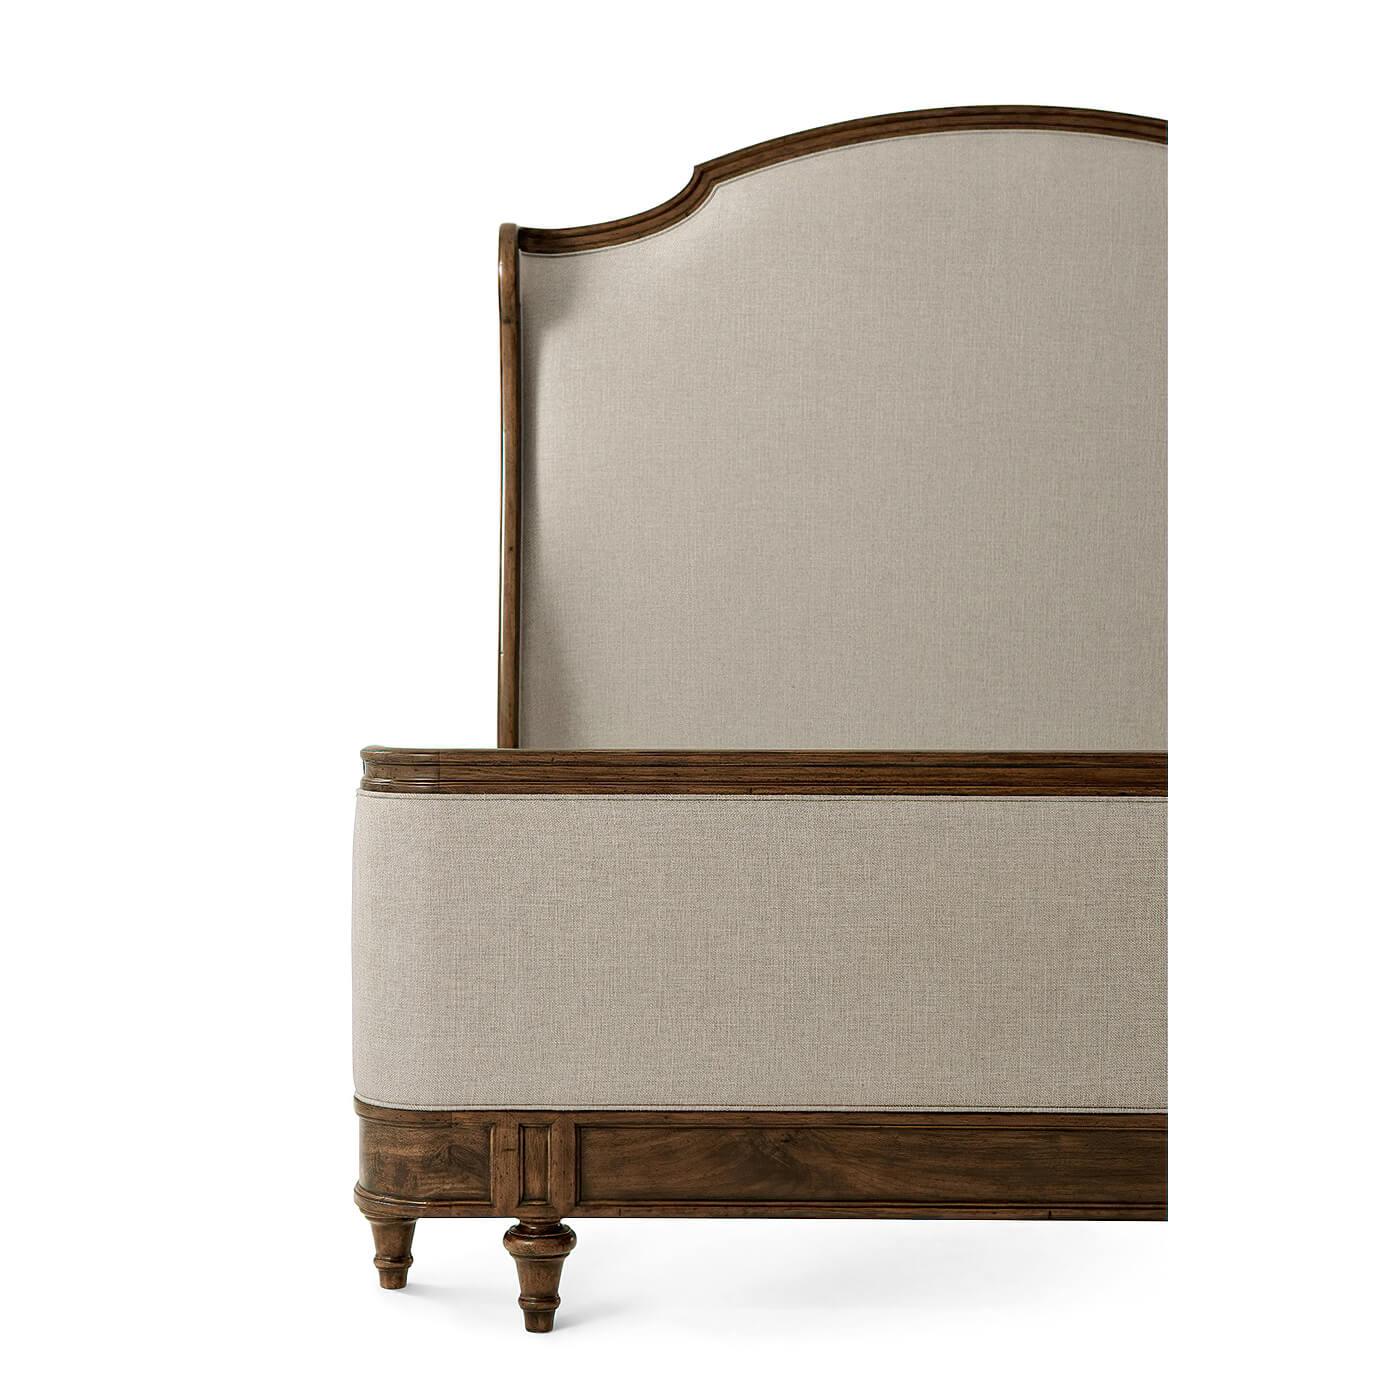 A French Provincial carved California King size bed with an arched and molded upholstered headboard with scroll wings, an upholstered and hand-carved framed low footboard, and paneled rails on turned and tapered toupee feet. 
Dimensions: 77.75